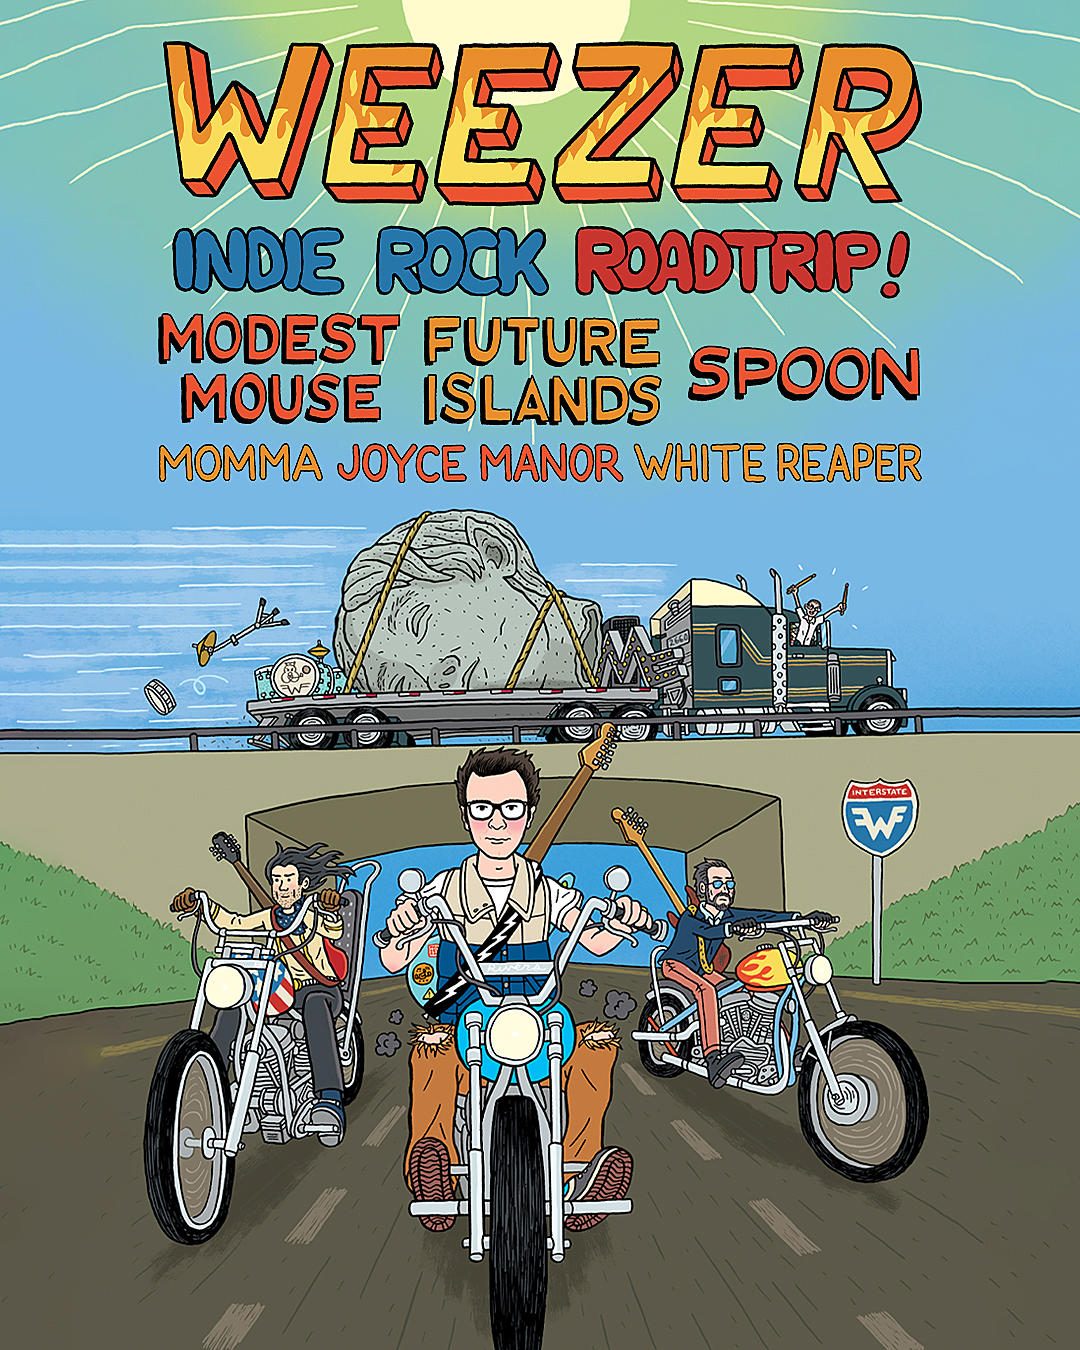 Weezer Surprise Show at the Roxy on March 16 - mxdwn Music